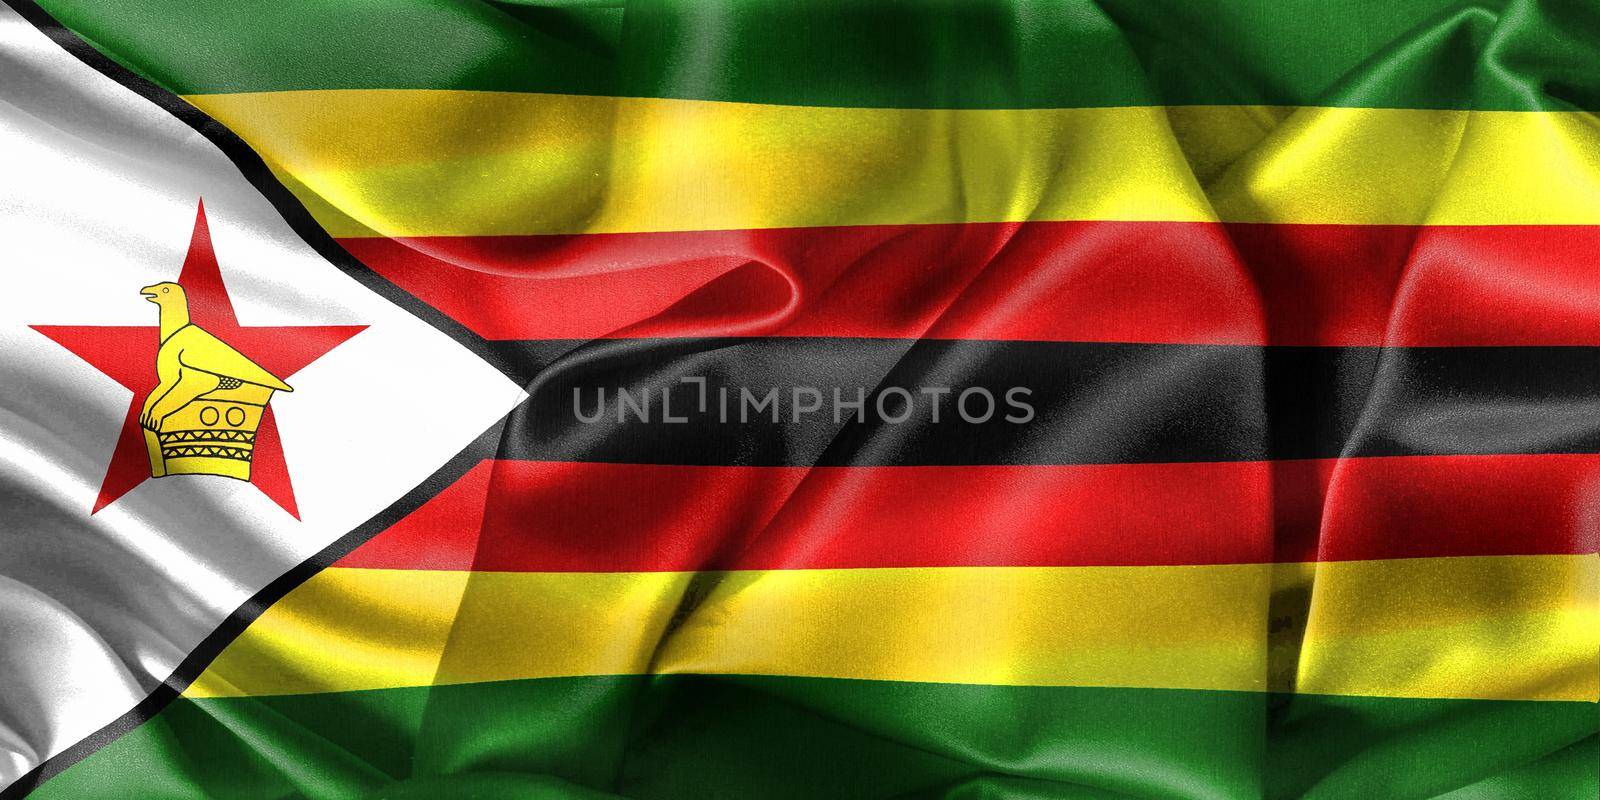 3D-Illustration of a Zimbabwe flag - realistic waving fabric flag by MP_foto71